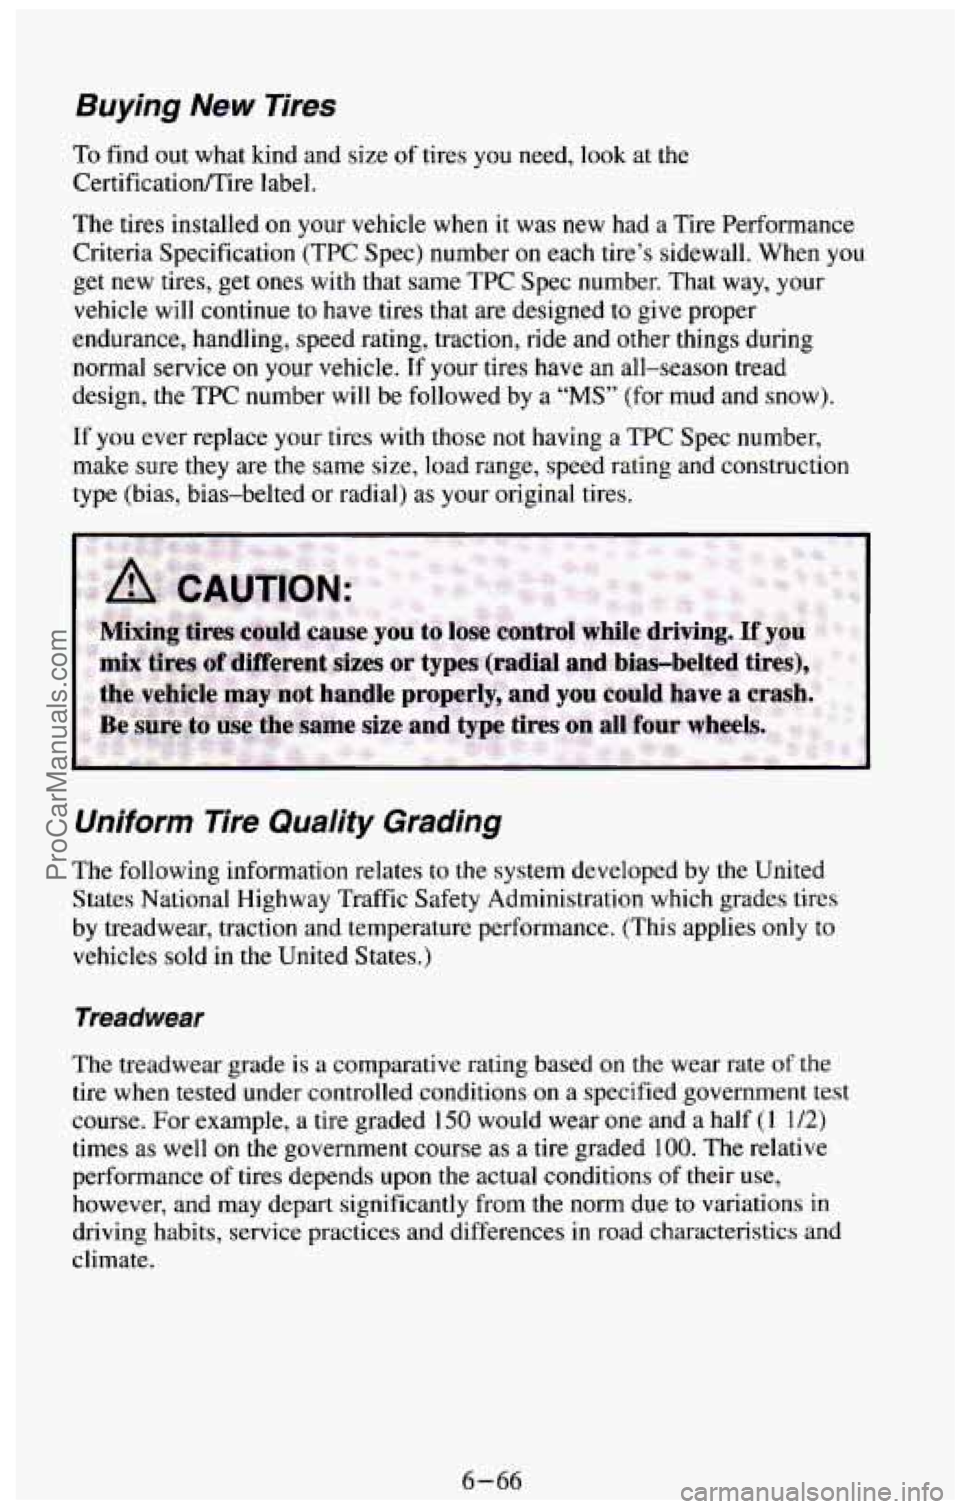 CHEVROLET SUBURBAN 1994  Owners Manual Buying  New  Tires 
To find  out  what  kind  and  size of tires  you need, look at the 
CertificatiodTire  label. 
The  tires installed 
on your vehicle  when it was new had a Tire Performance 
Crite